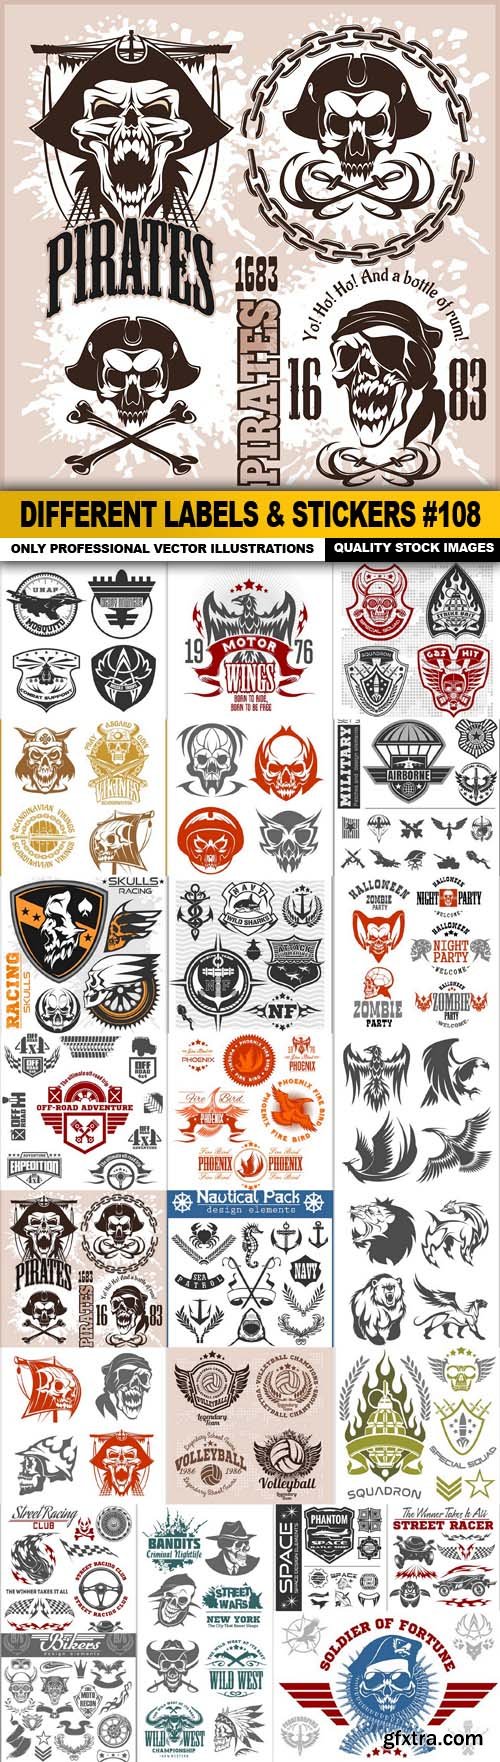 Different Labels & Stickers #108 - 25 Vector